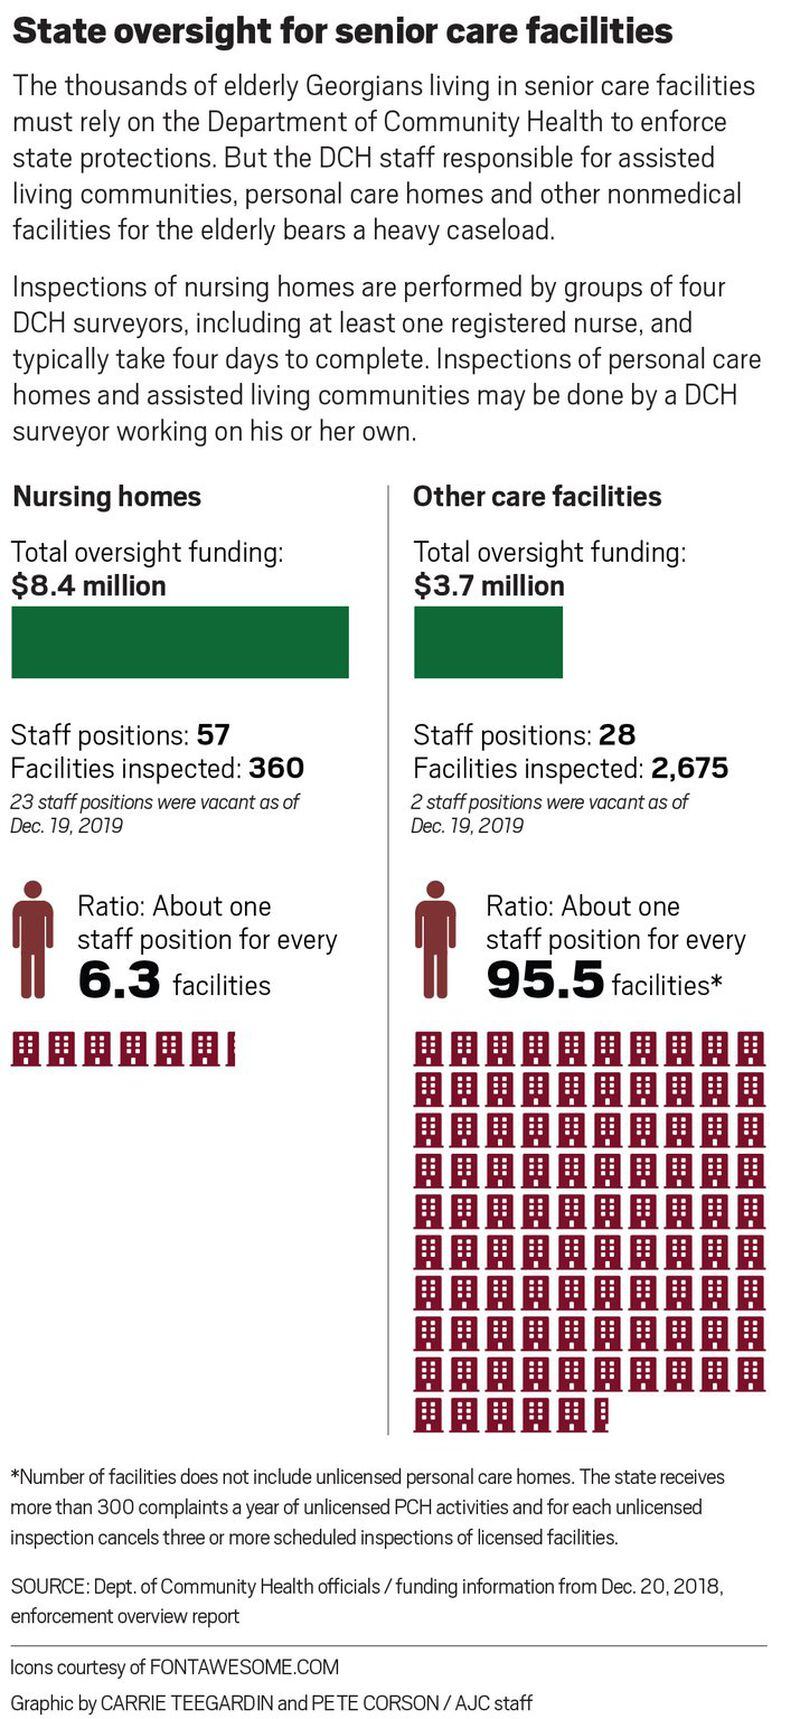 The state agency responsible for oversight of senior care facilities has about one staff position for every 95 facilities. The AJC found that some facilities aren’t inspected for 16 months or more. Georgia law doesn’t require annual inspections.